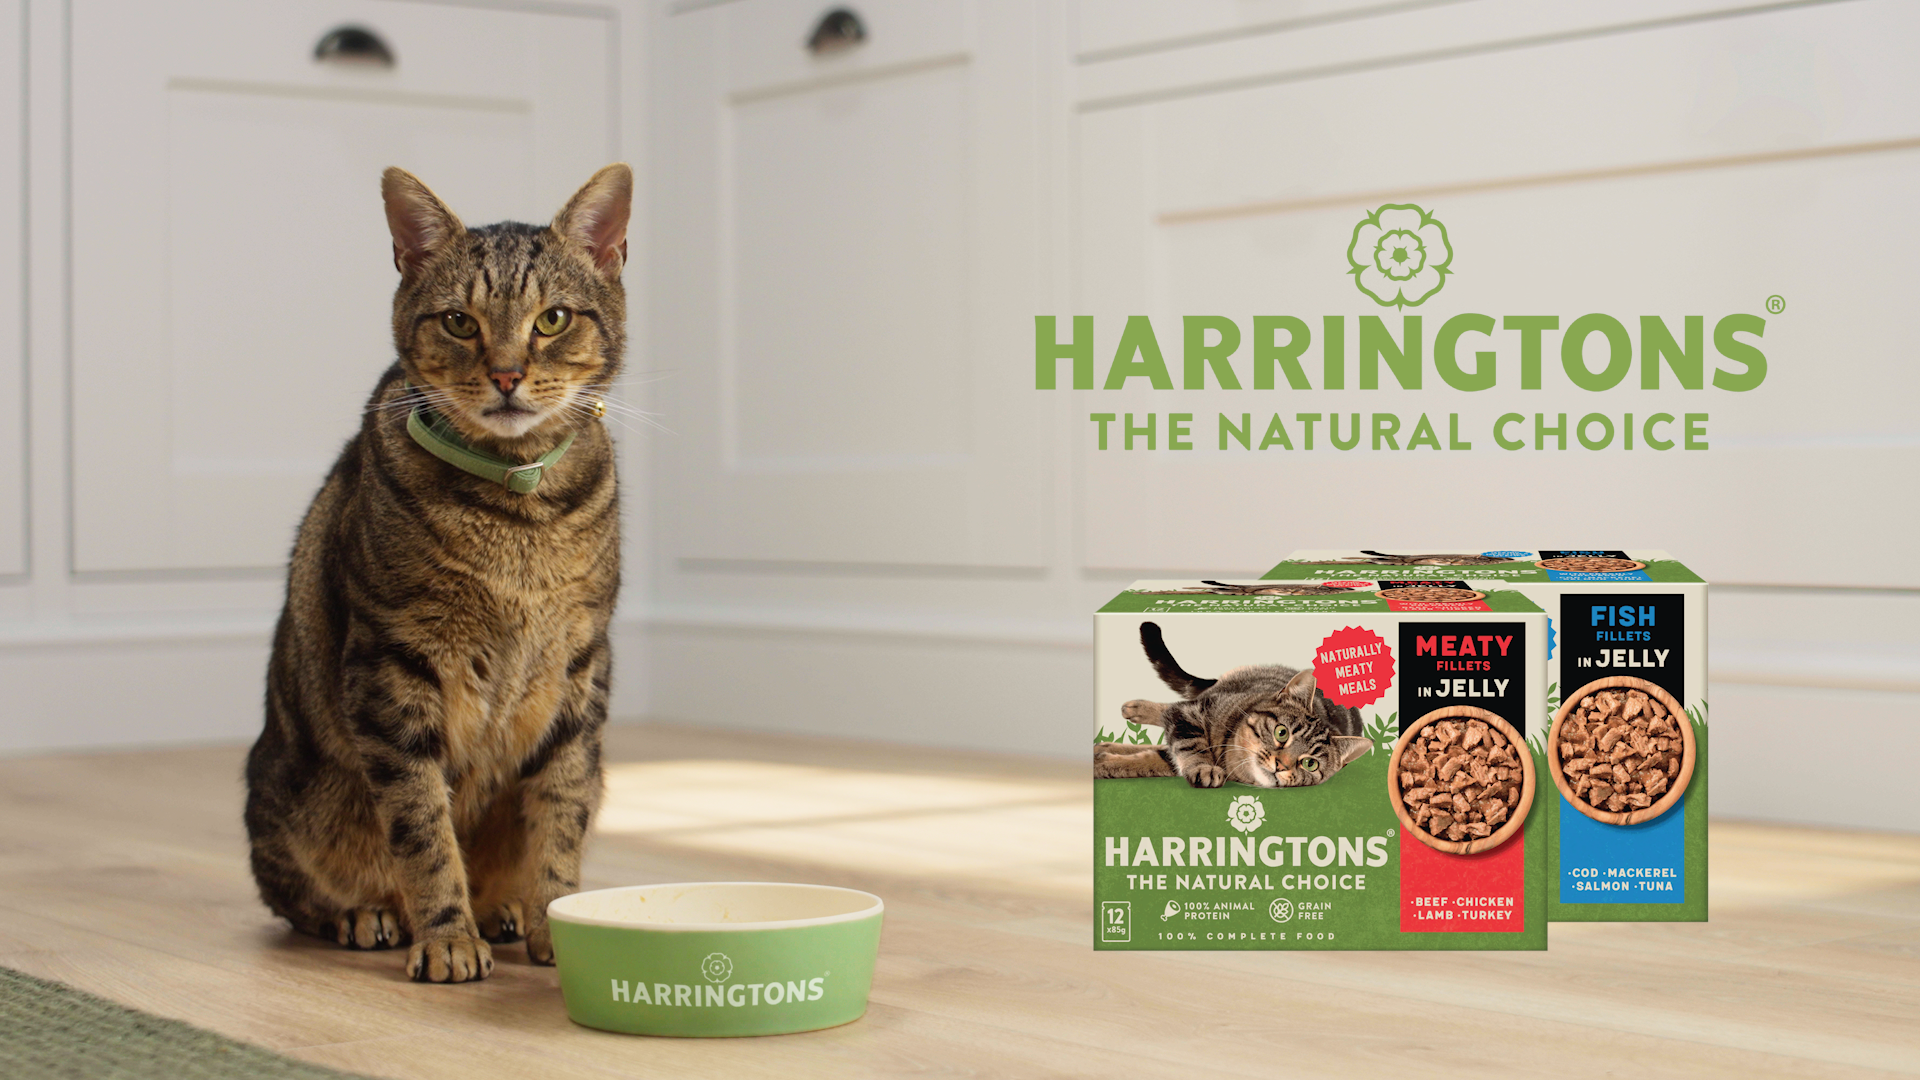 The Hunt is Over for Naturally Meatier Meals in our new cat TV ad!